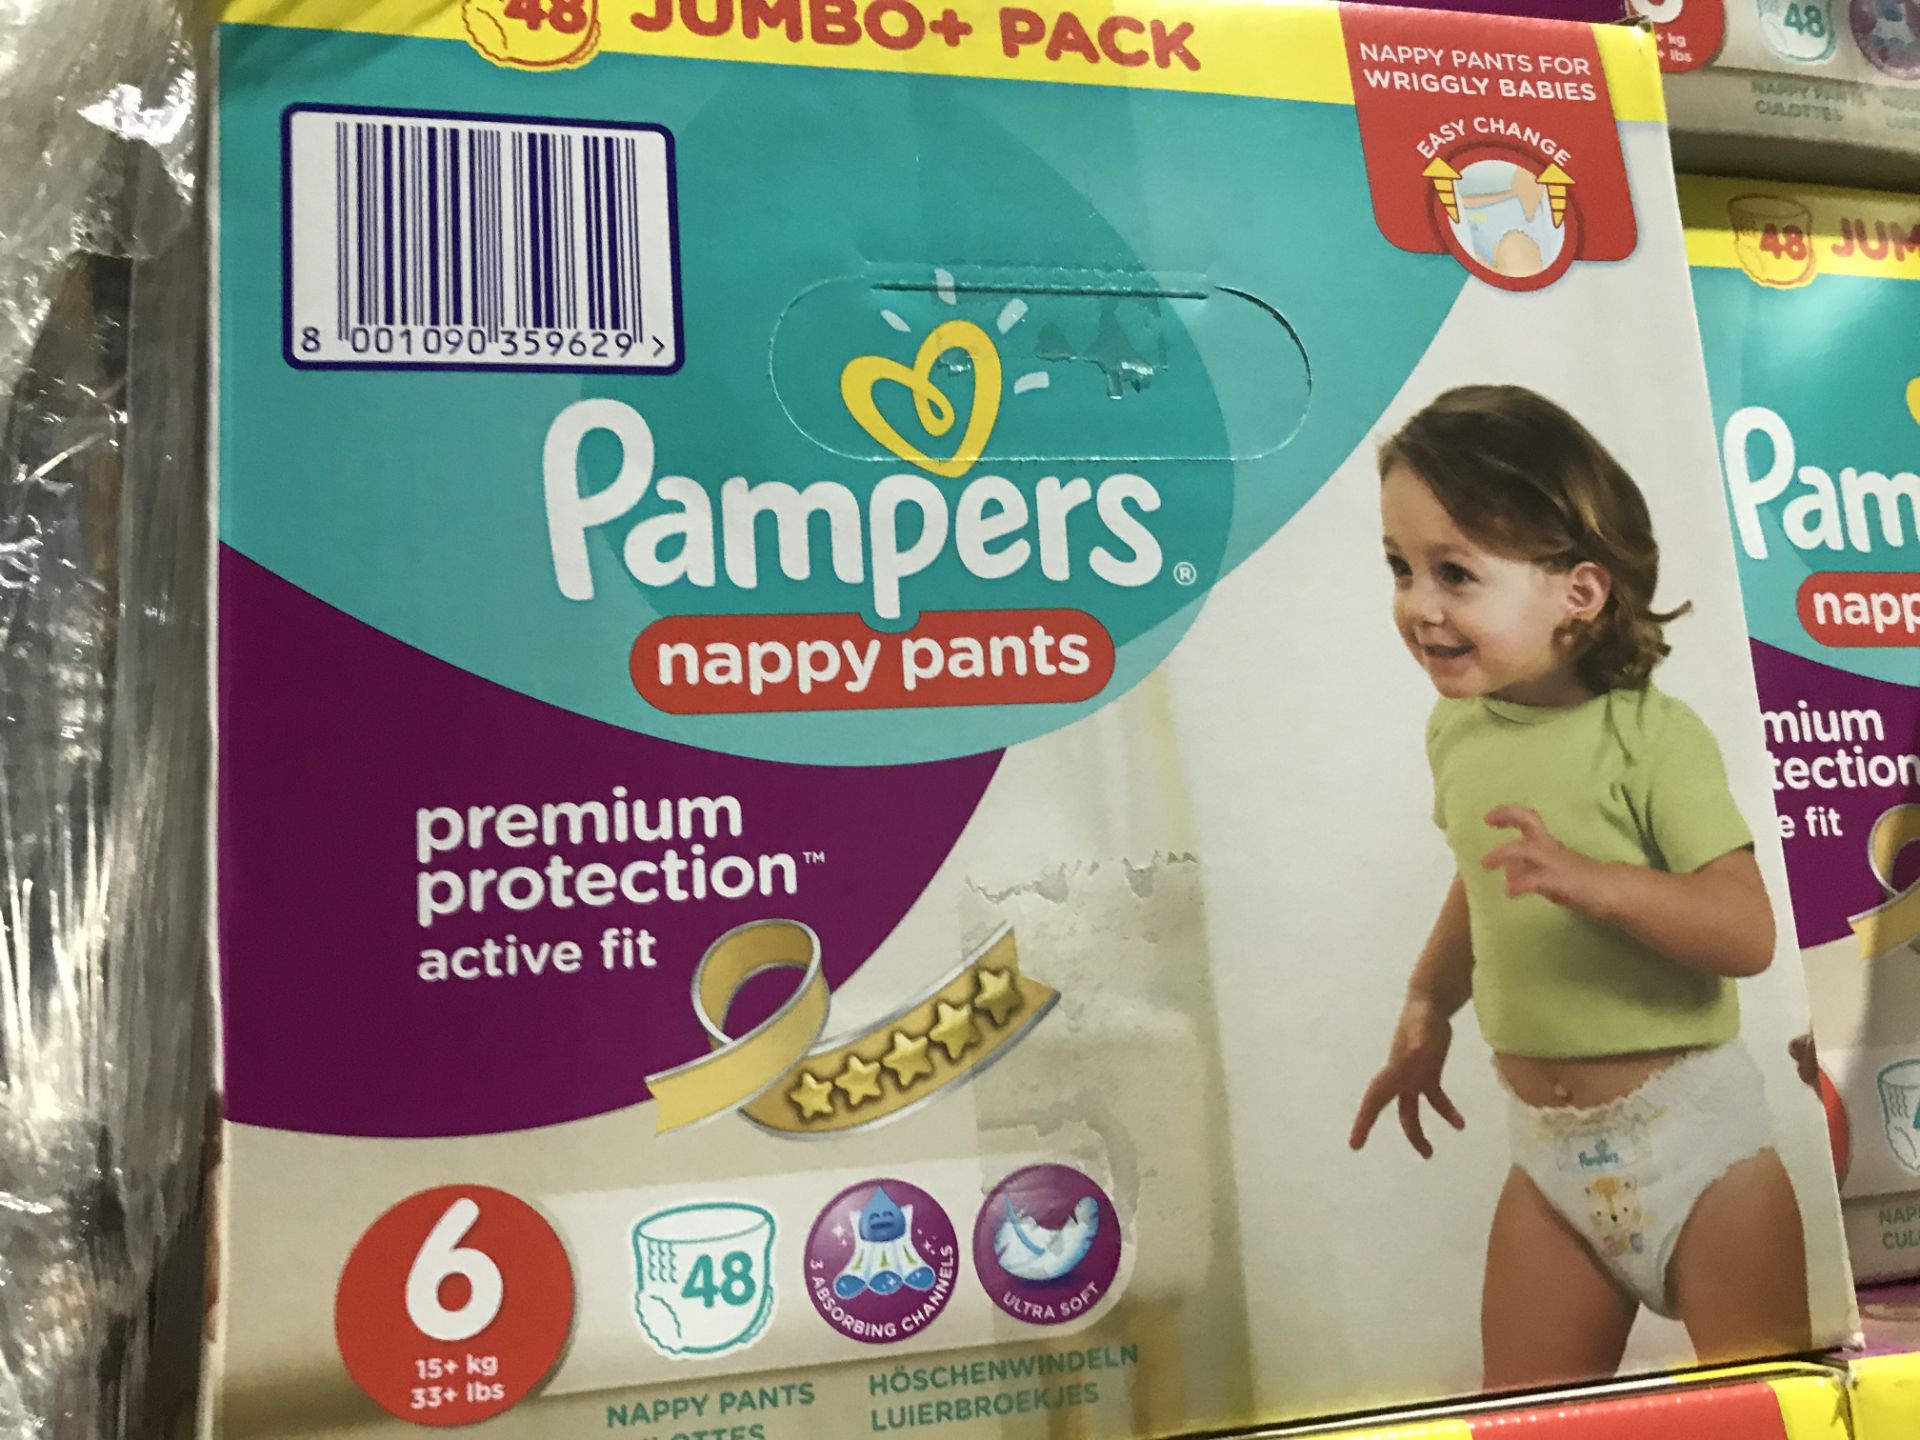 3 X PACKS OF 48 PAMPERS NAPPY PANTS SIZE 6